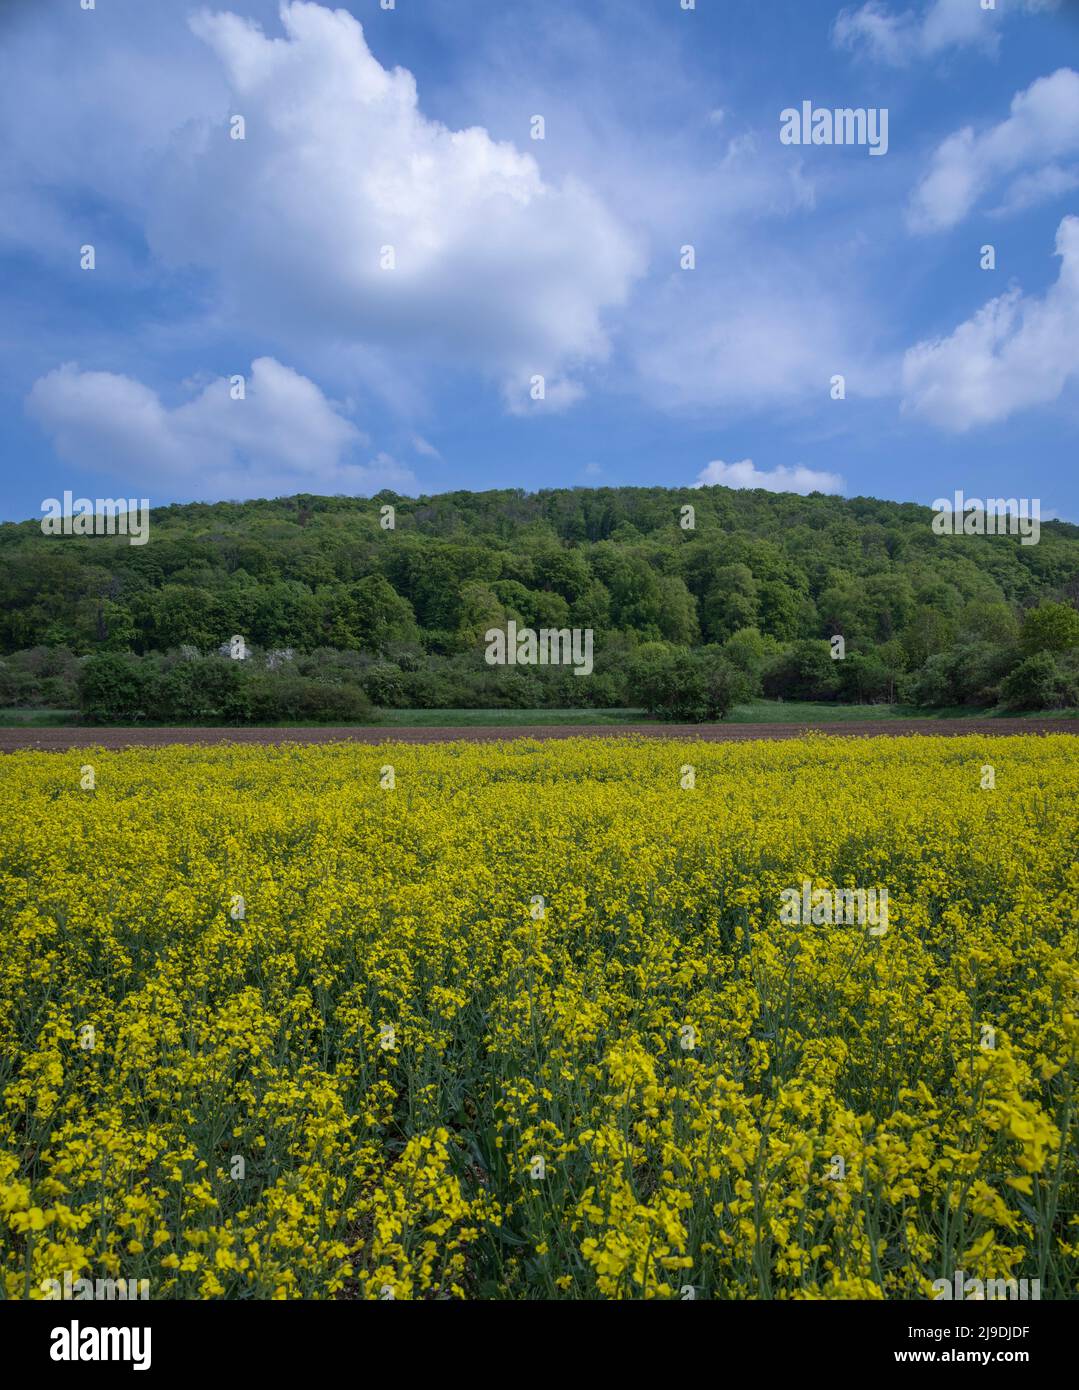 field of rapeseed (Brassica napus) with forested hill behind, near Donauworth, Franconia, Germany Stock Photo